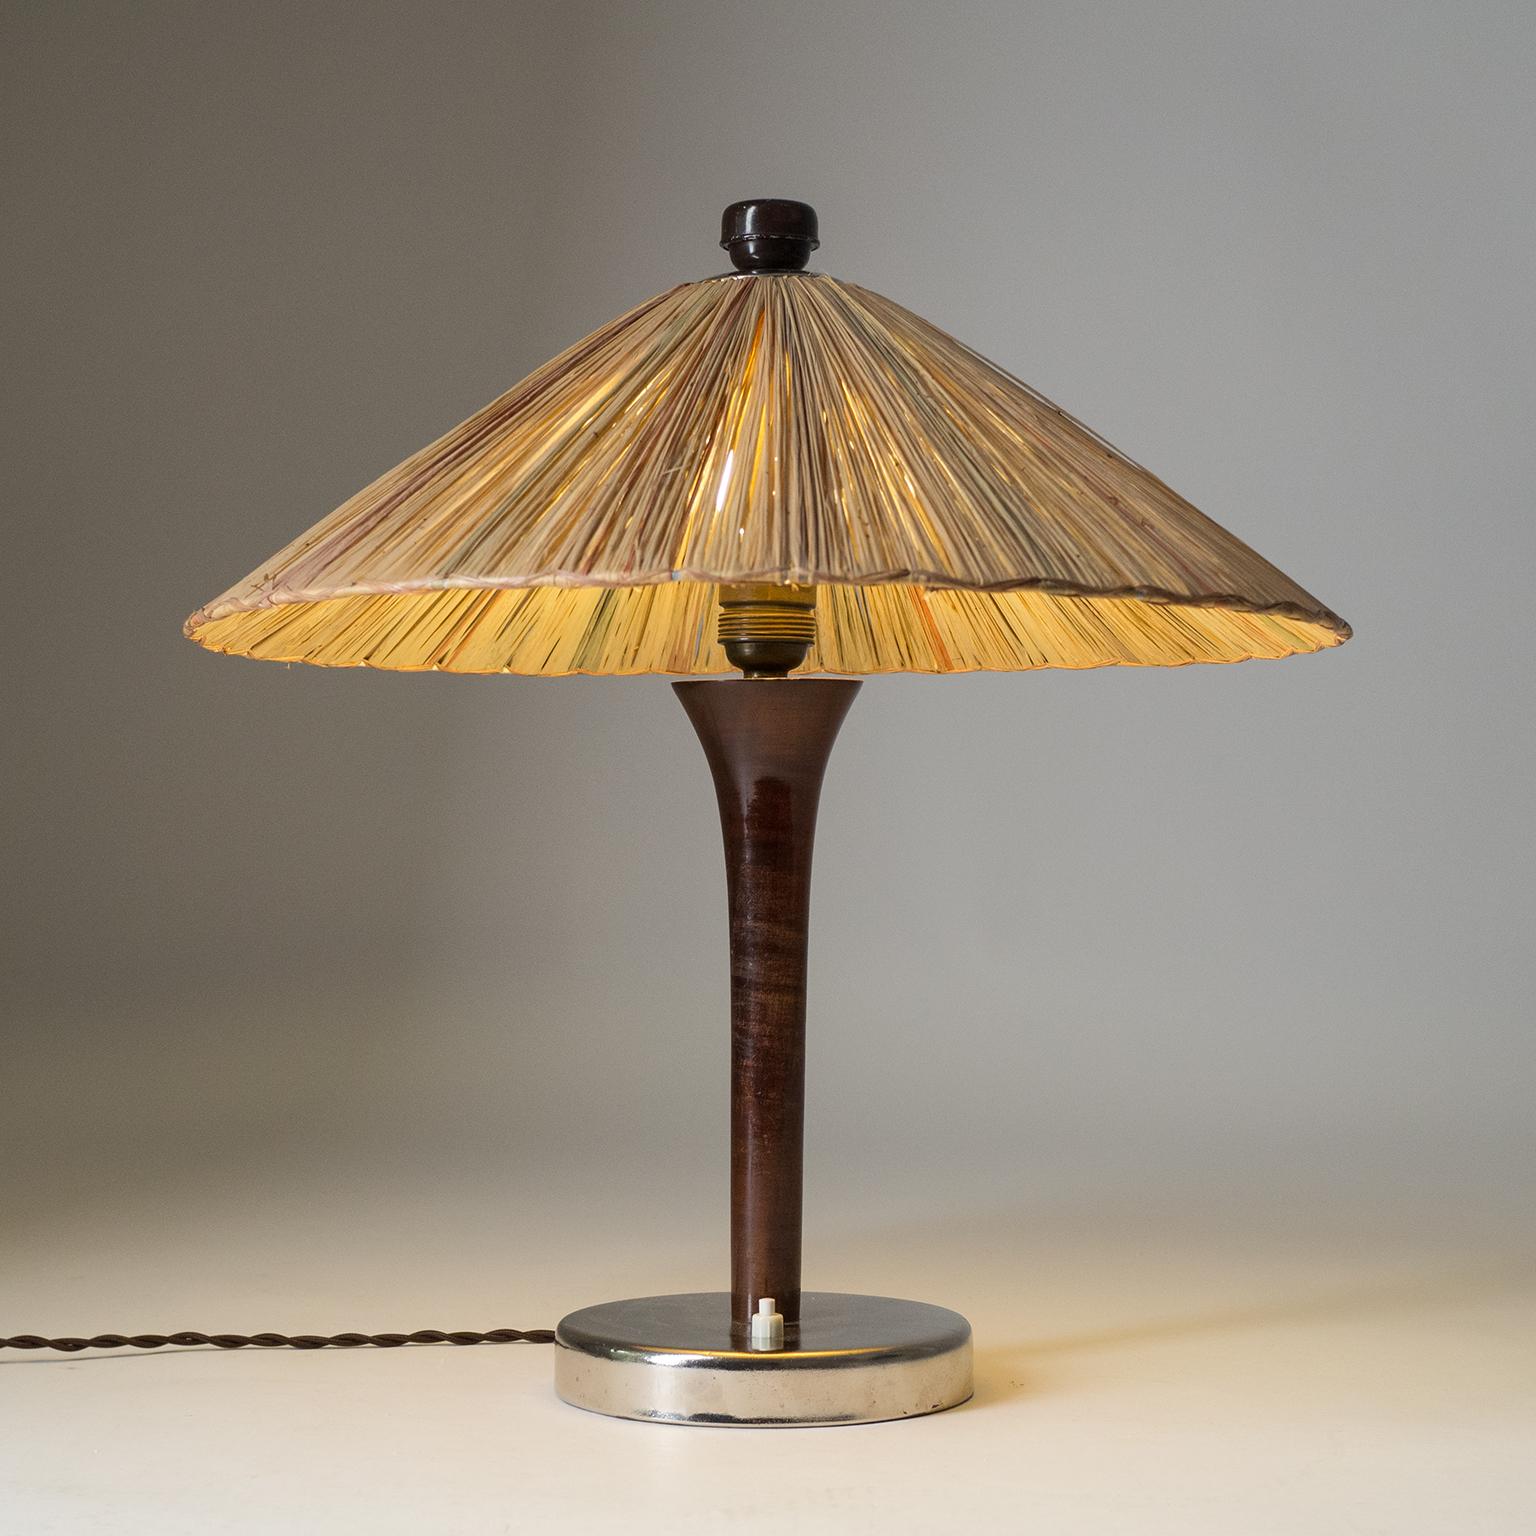 Art Deco Table Lamp, 1930s, with Original Straw Shade 8